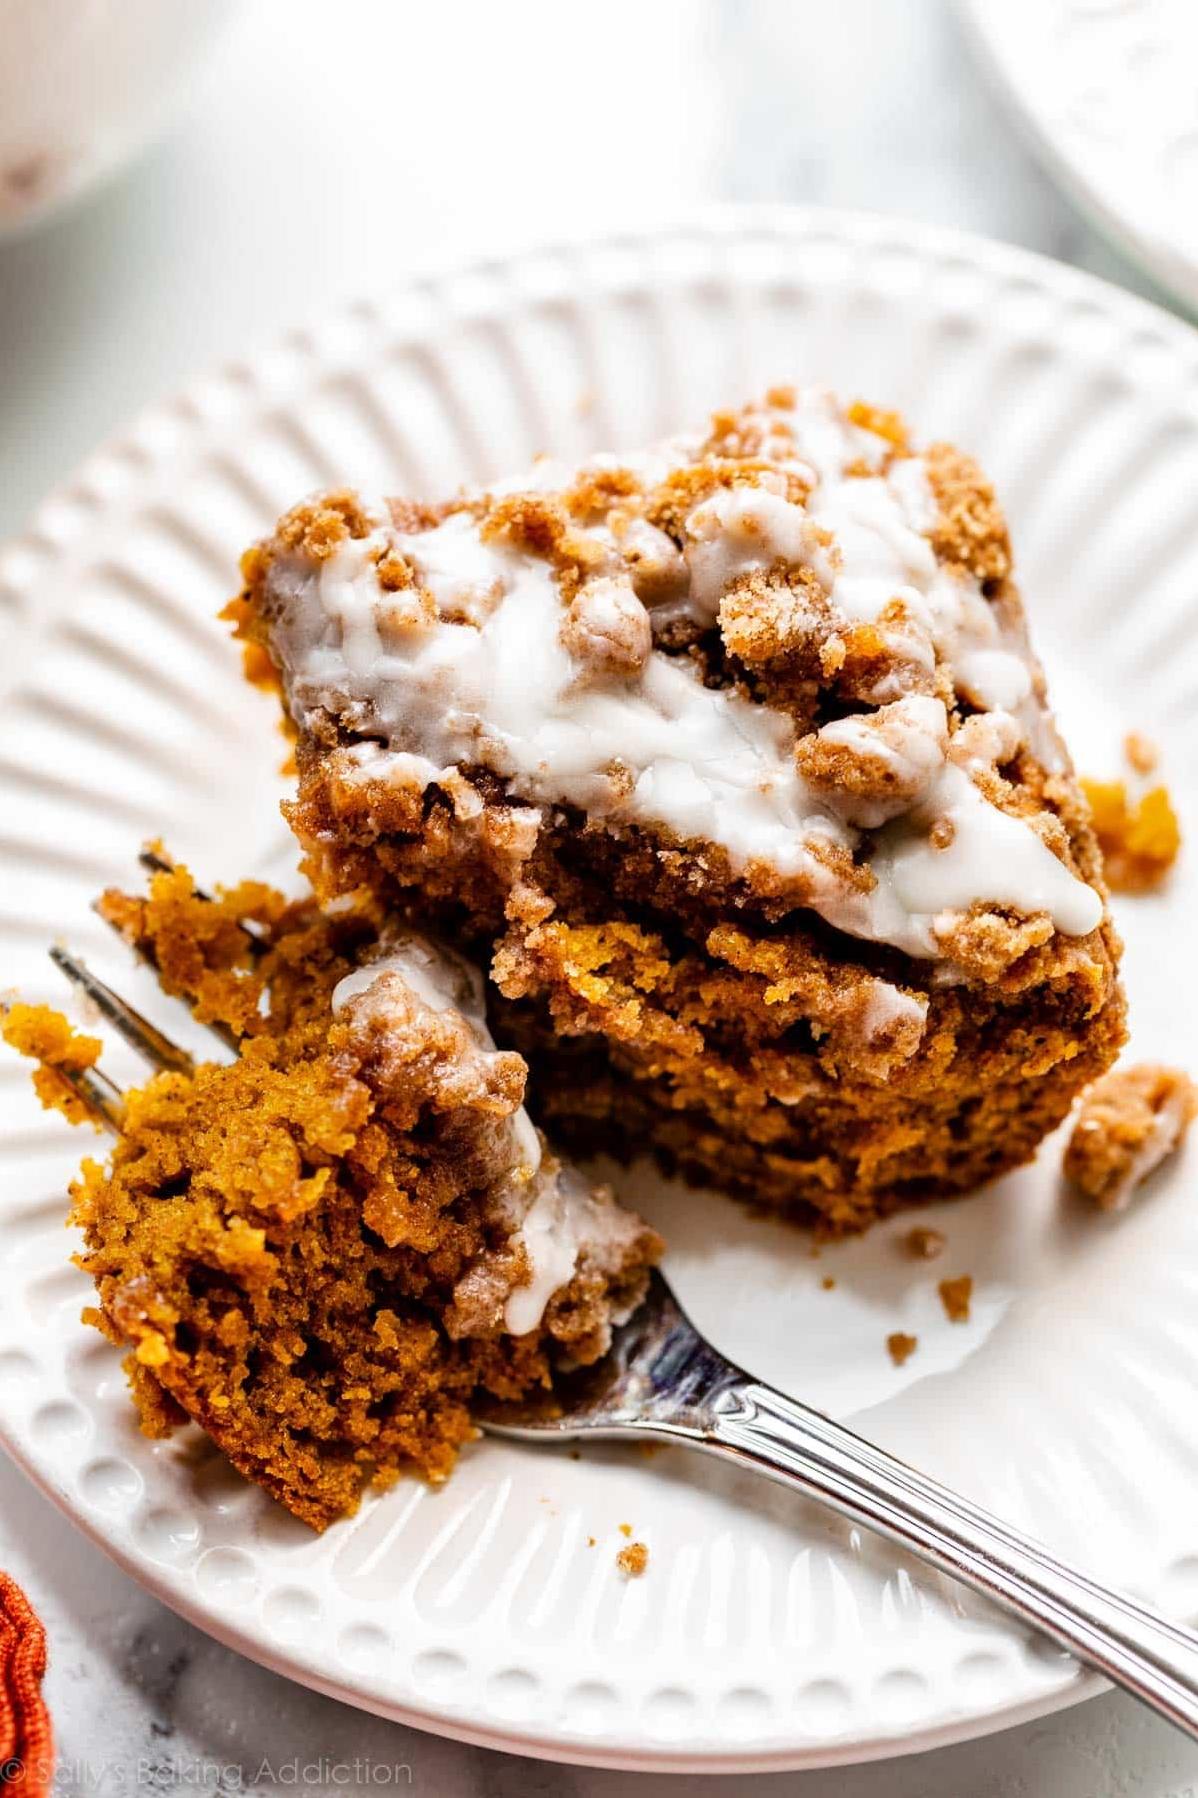  The aroma of baked pumpkin and espresso will fill your home while making this coffee cake.